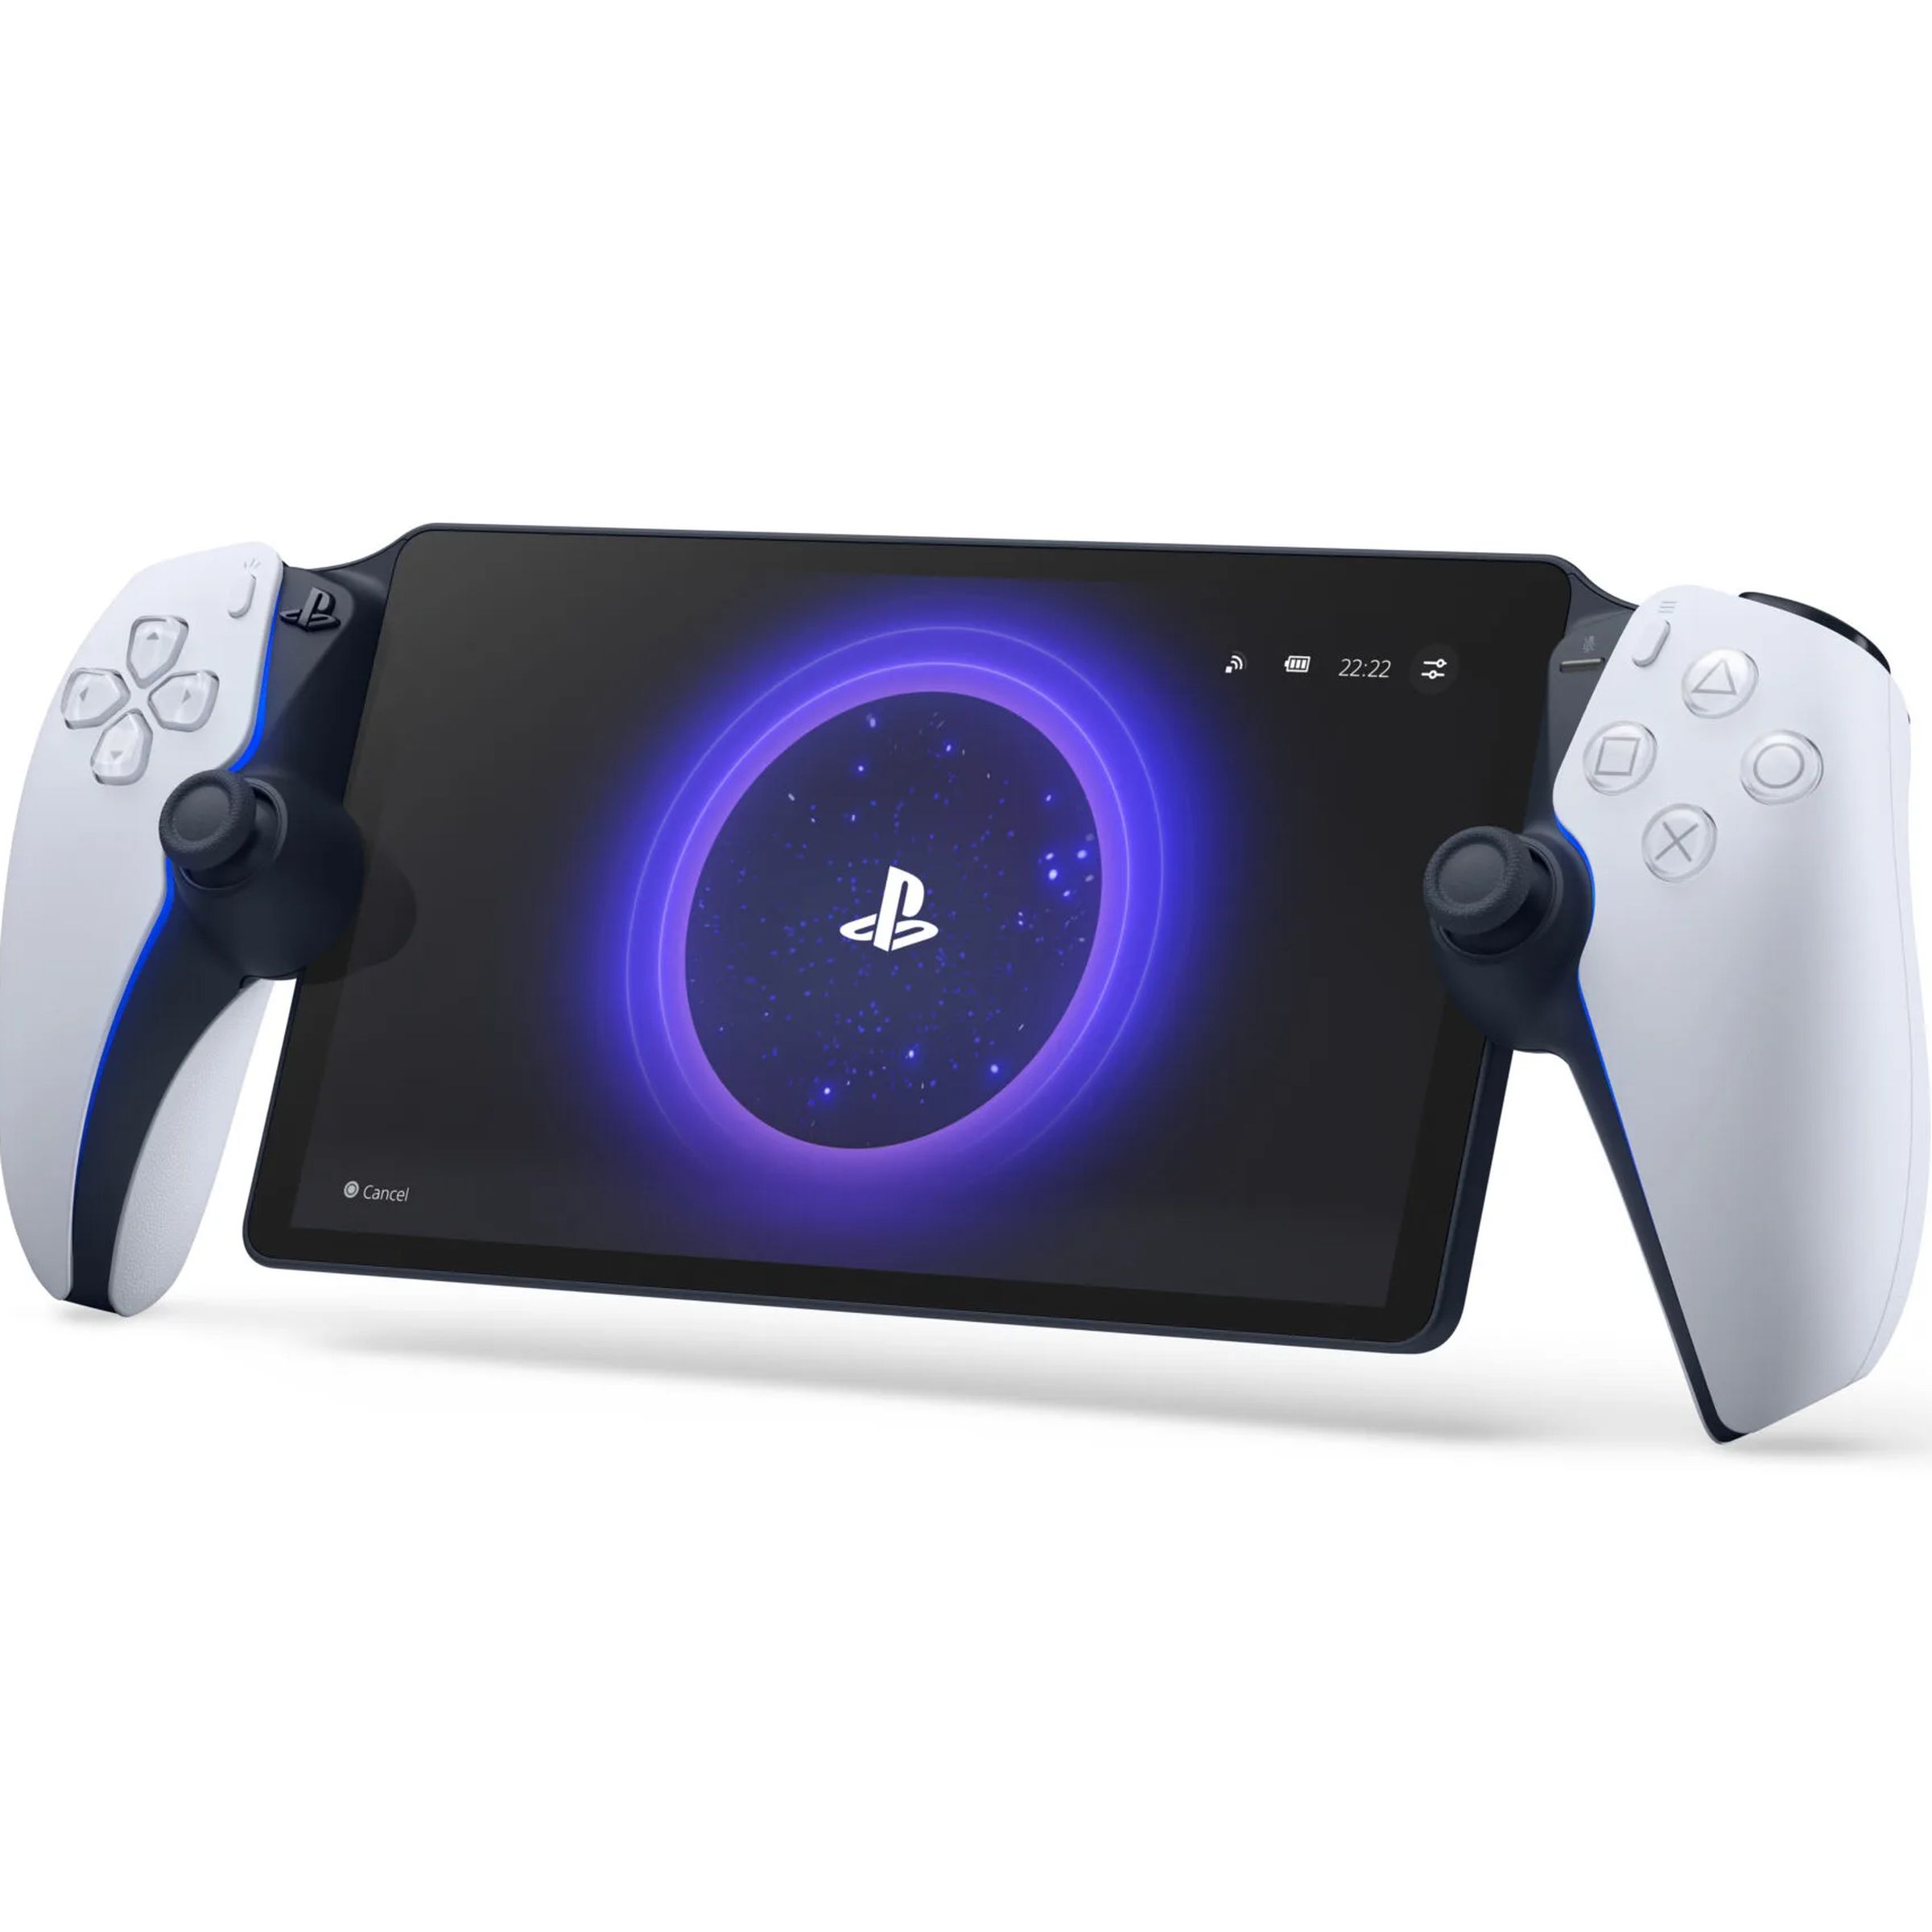 PlayStation Portal shown floating on a white background.